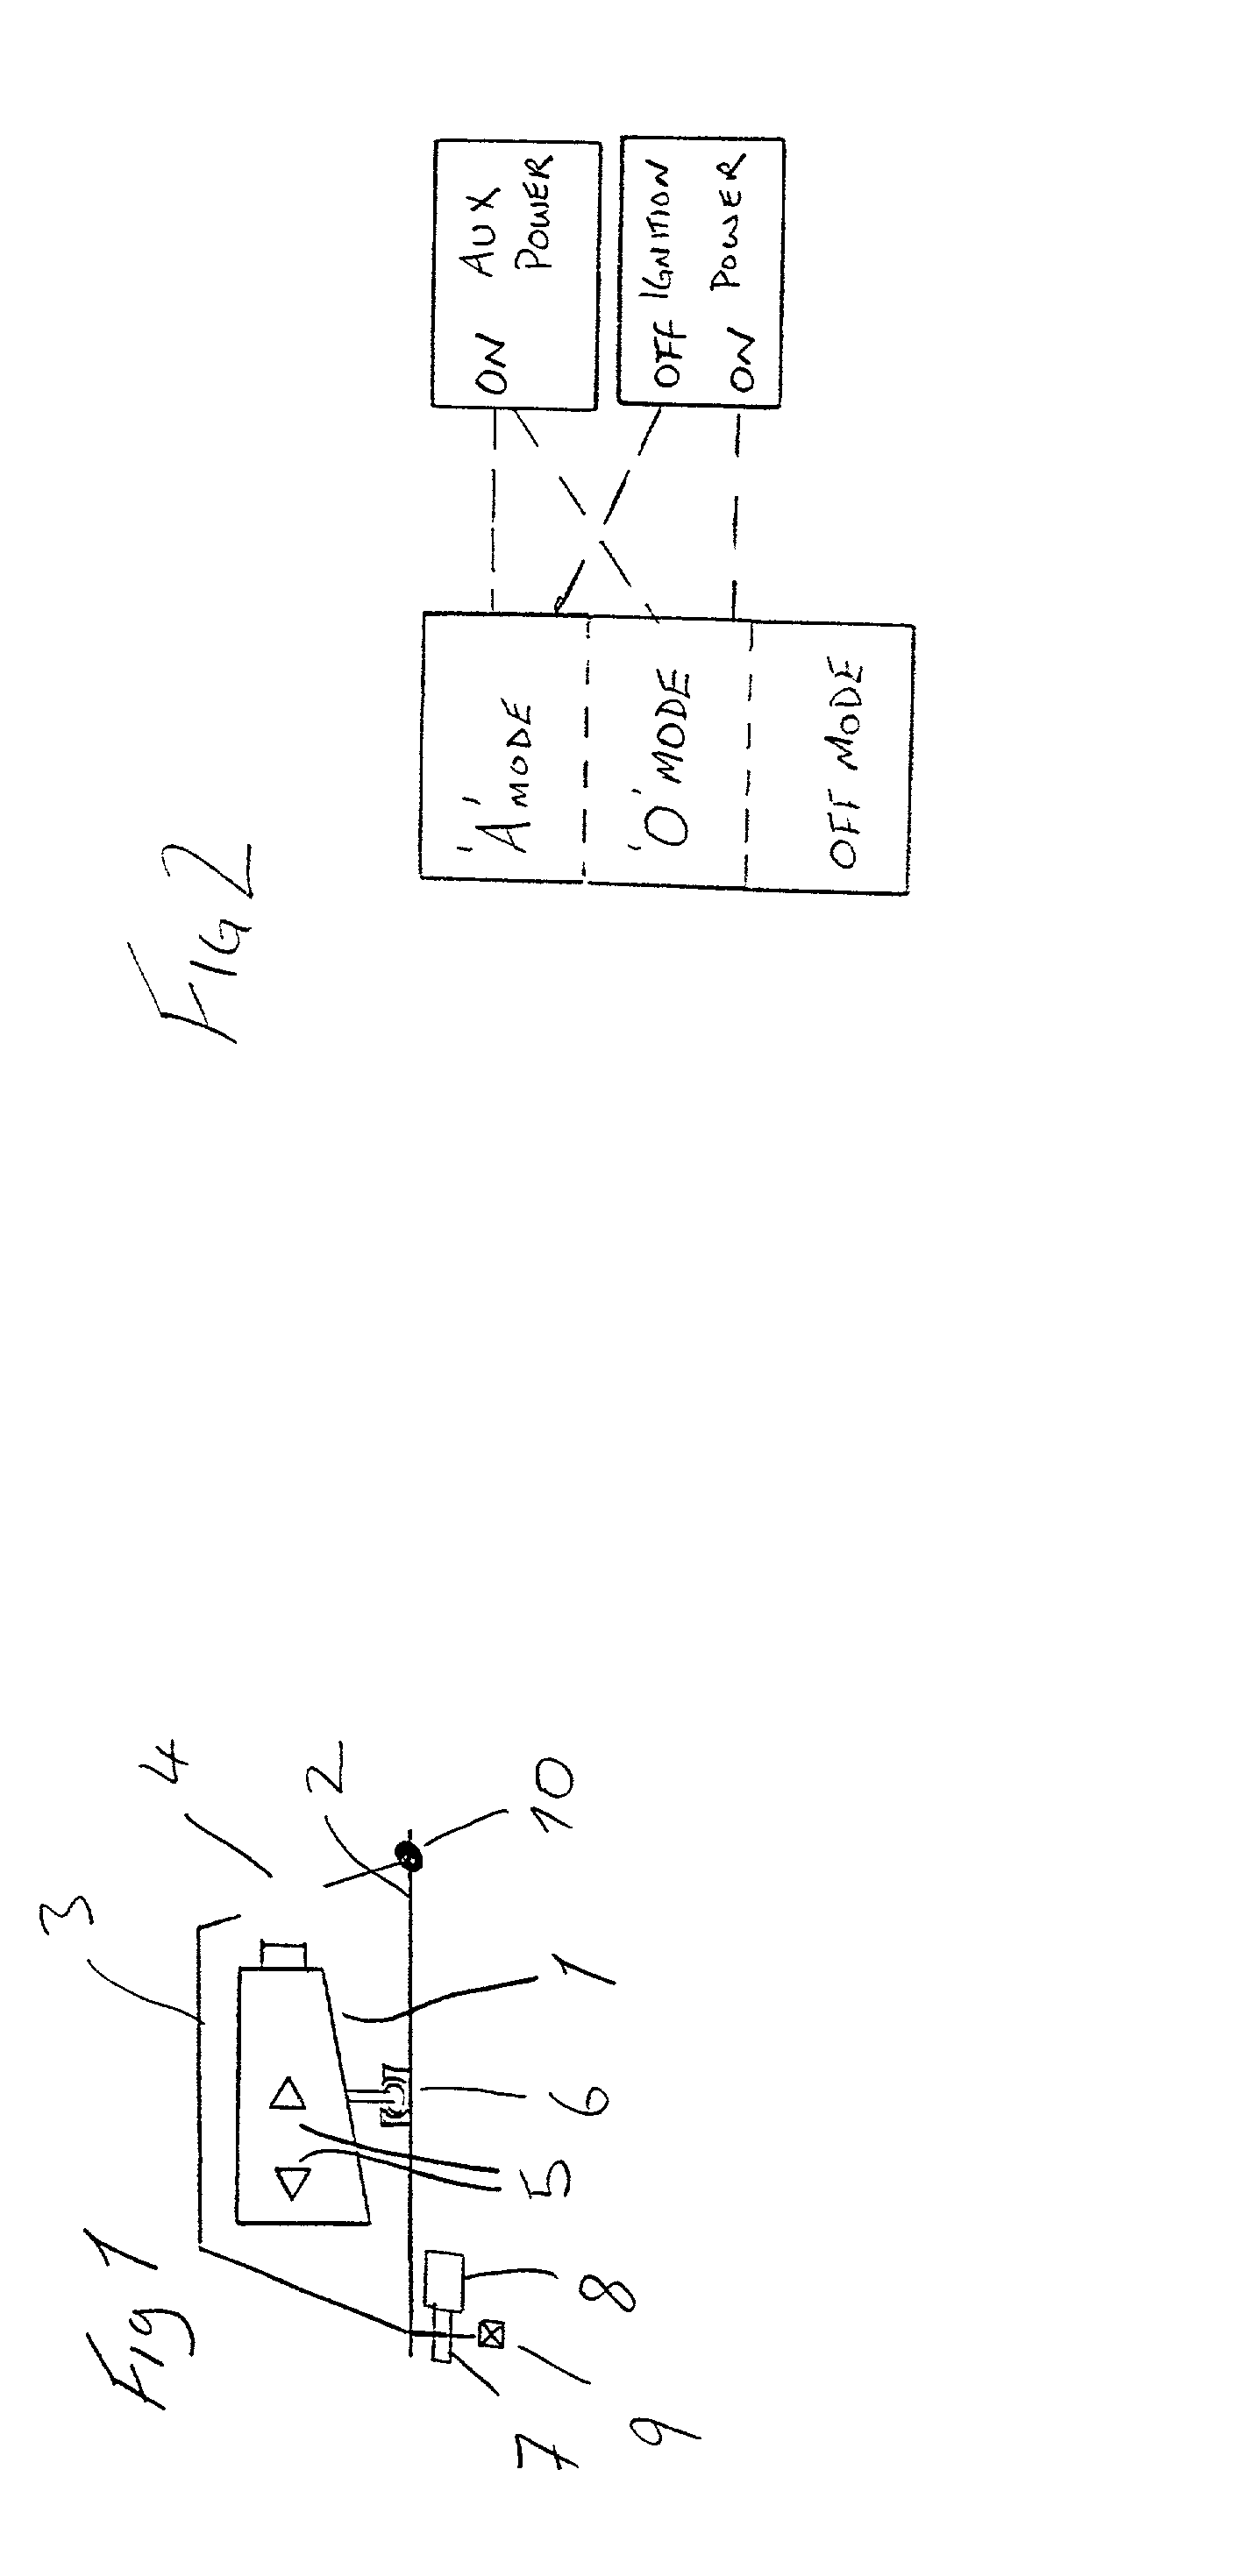 Control system for a vehicle situated device